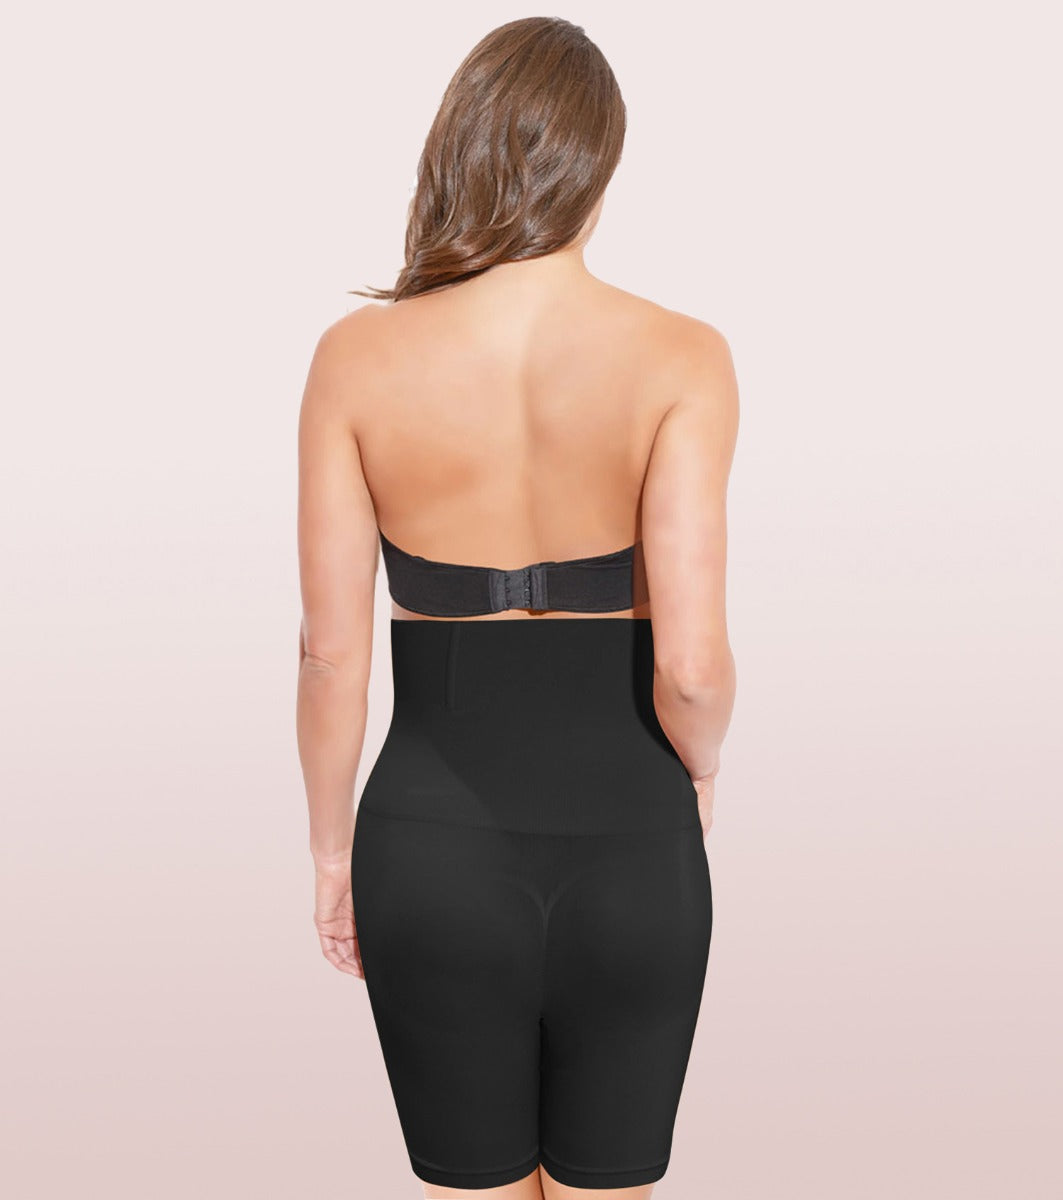 Enamor Hi Waist Lace Slimmer Price Starting From Rs 1,669. Find